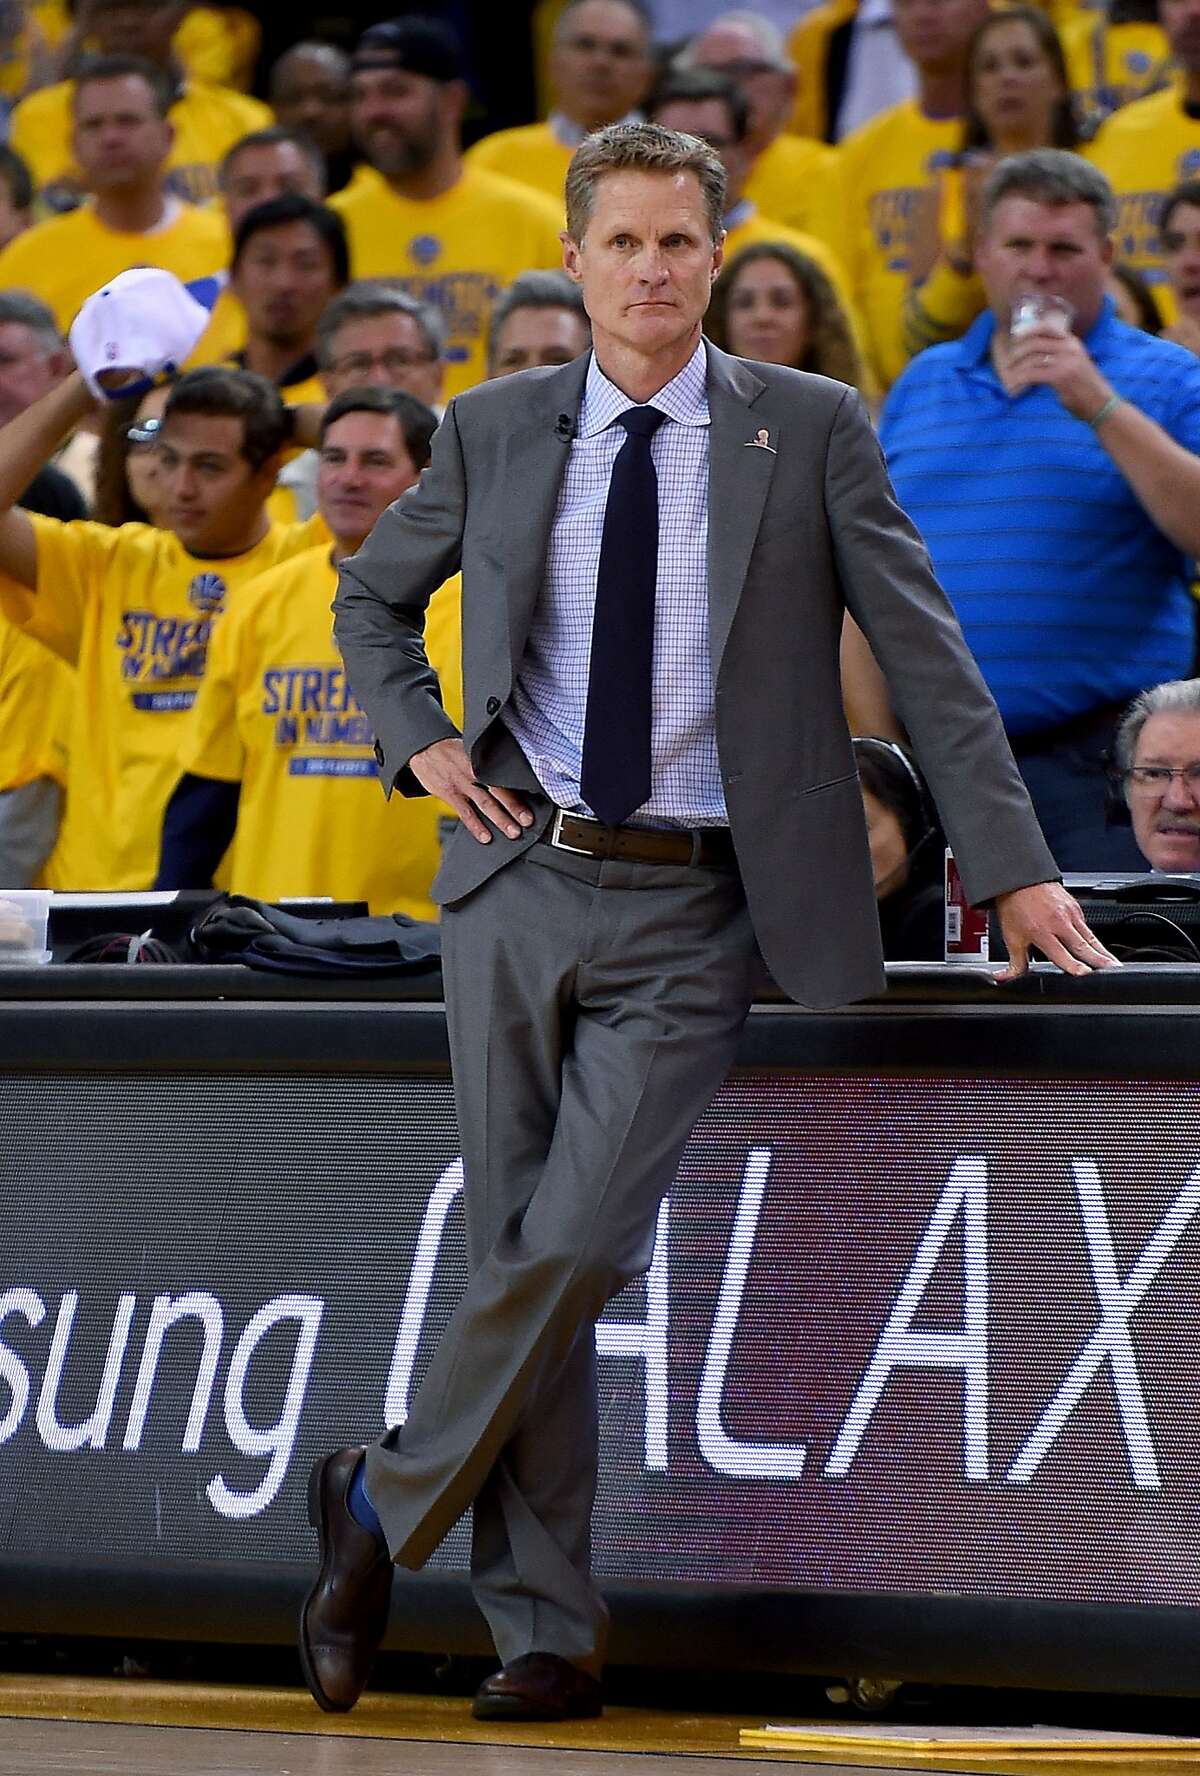 OAKLAND, CA - APRIL 20: Head coach Steve Kerr of the Golden State Warriors looks on against the New Orleans Pelicans in the second quarter during the first round of the 2015 NBA Playoffs at ORACLE Arena on April 20, 2015 in Oakland, California. NOTE TO USER: User expressly acknowledges and agrees that, by downloading and or using this photograph, User is consenting to the terms and conditions of the Getty Images License Agreement. (Photo by Thearon W. Henderson/Getty Images)